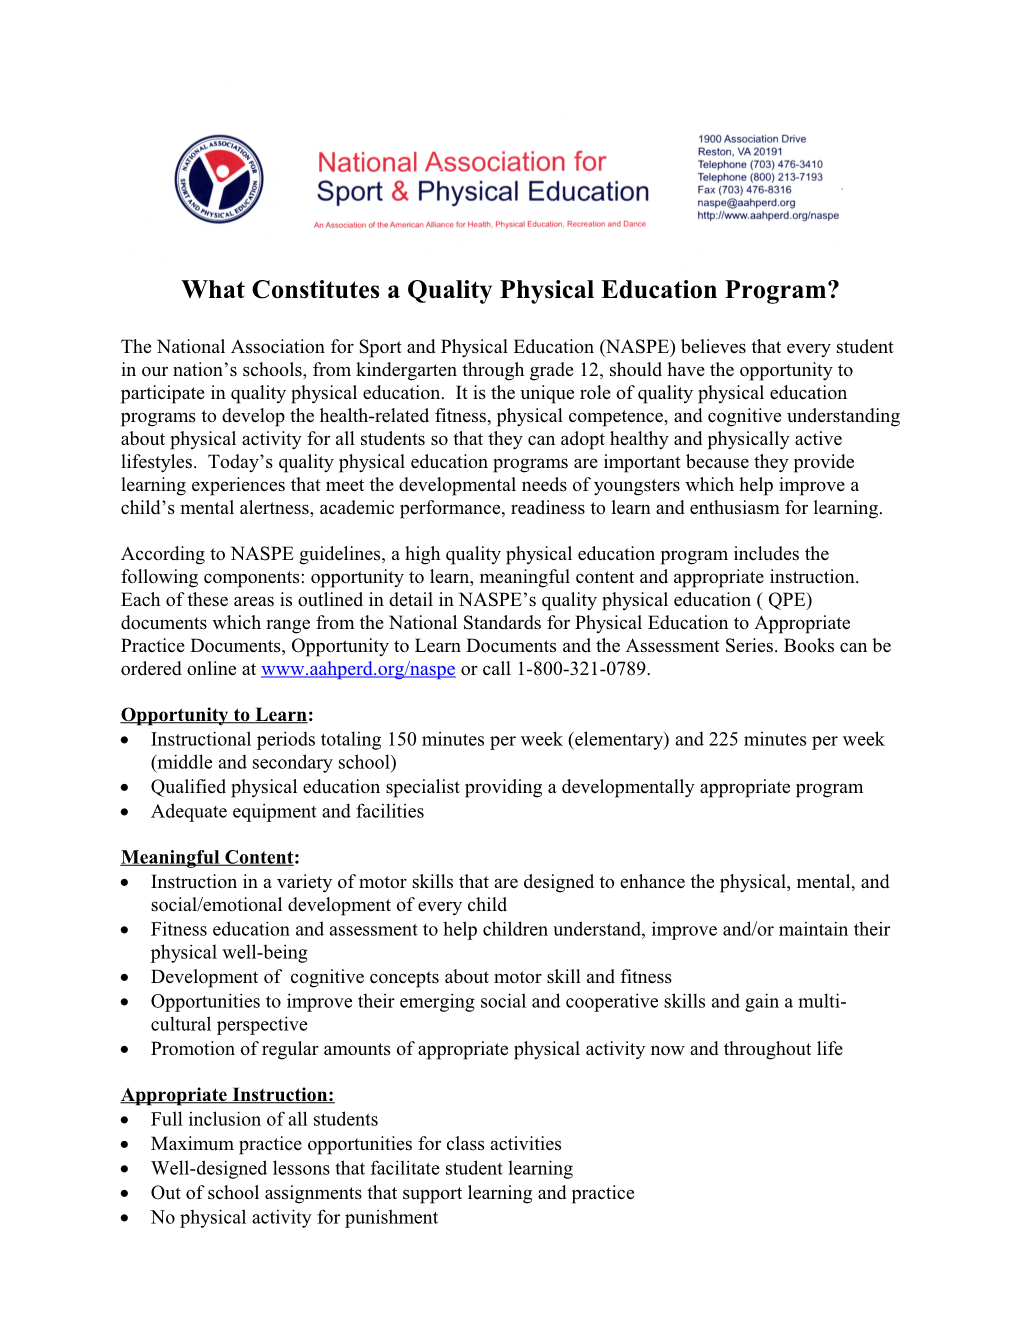 What Constitutes a Quality Physical Education Program